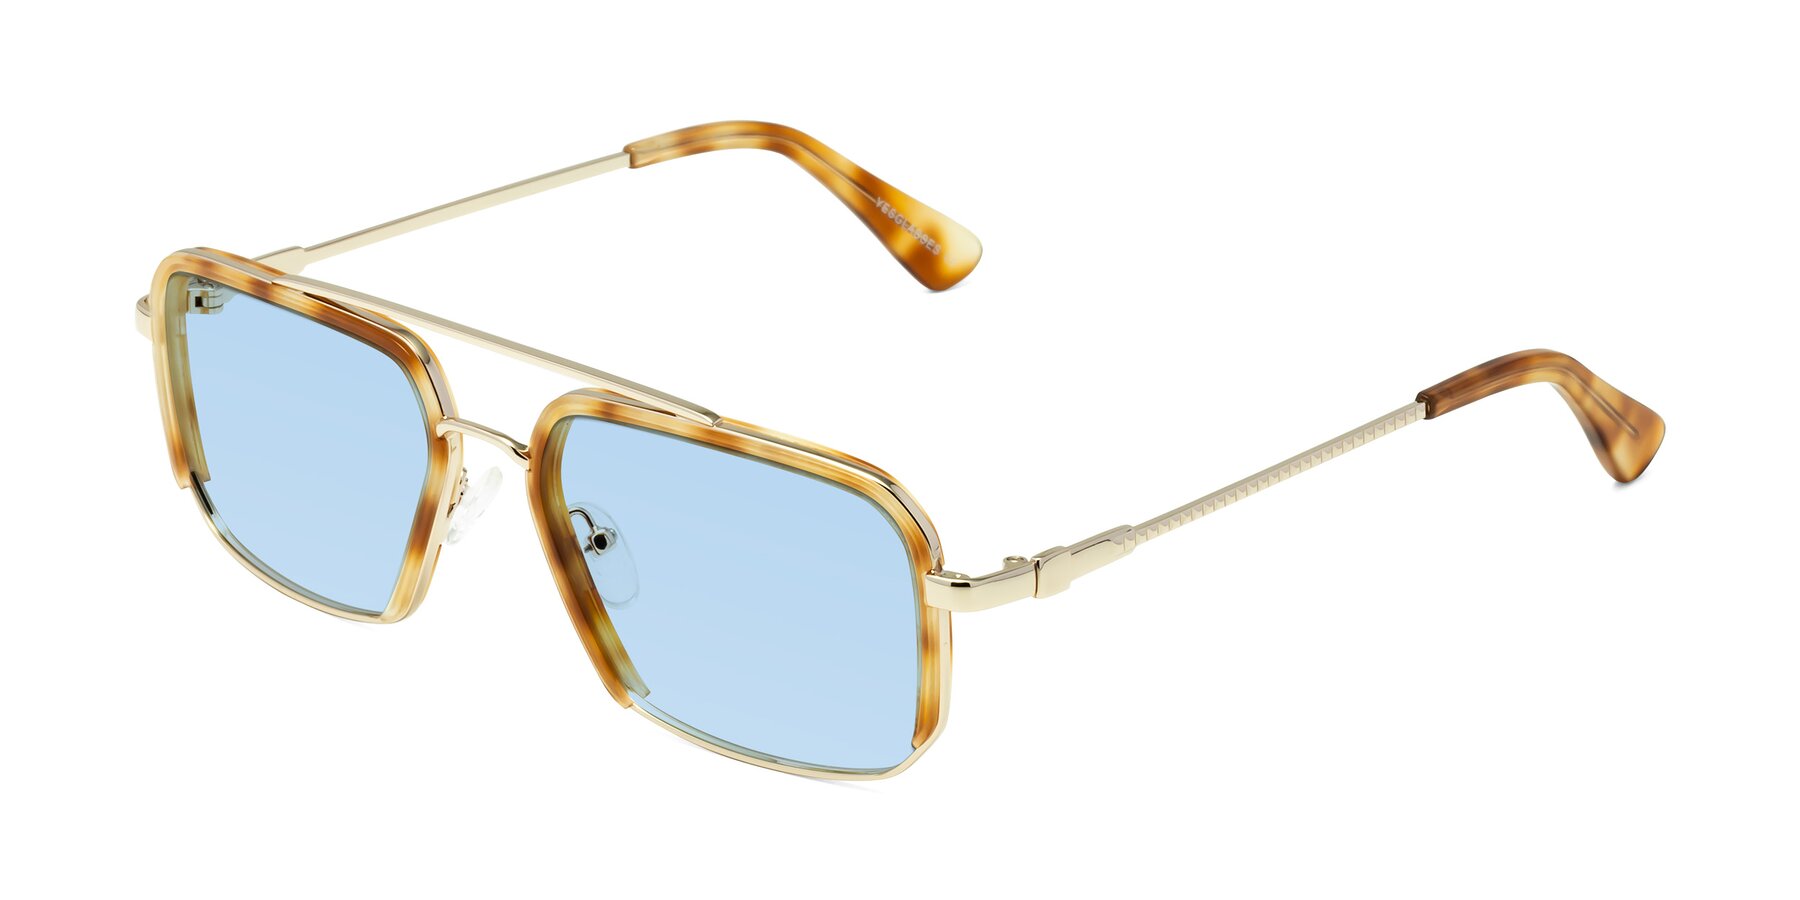 Angle of Dechter in Yellow Tortoise-Gold with Light Blue Tinted Lenses